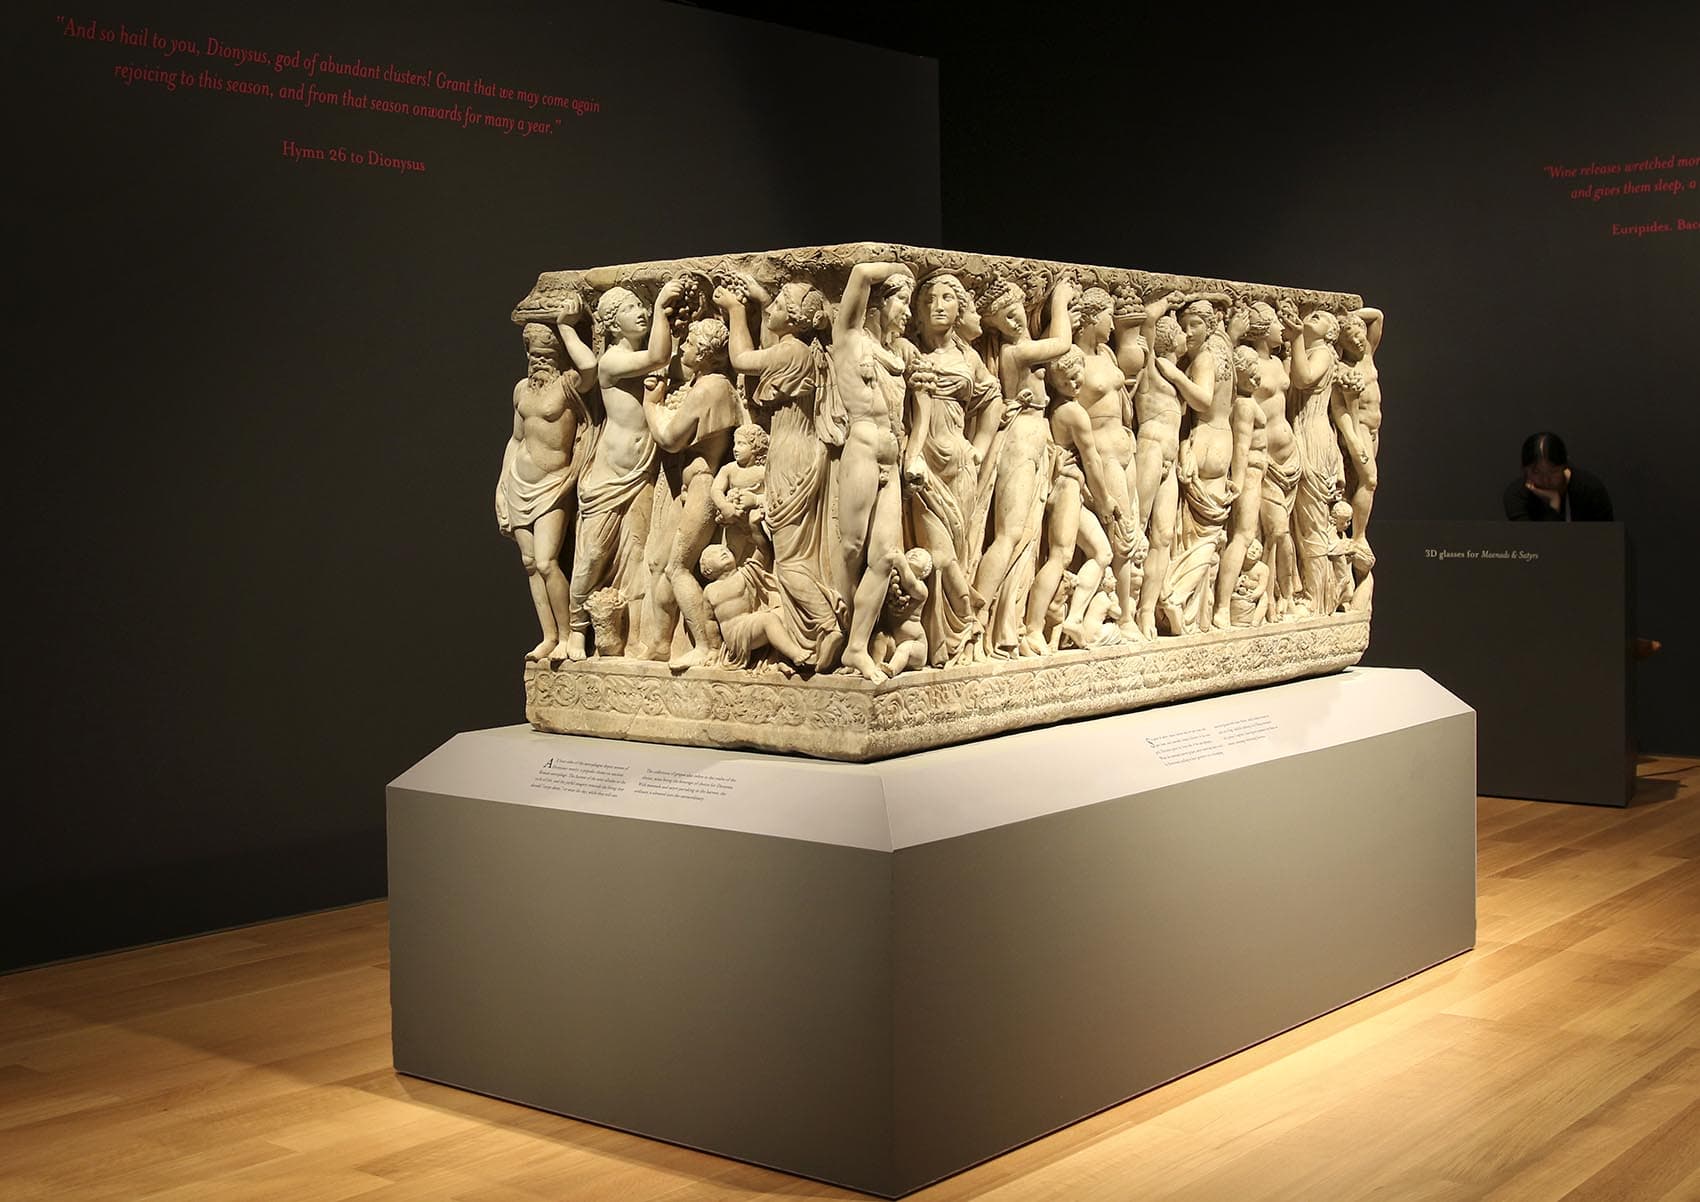 The Farnese Sarcophagus, which has been sitting, almost hidden, in the Isabella Stewart Gardner Museum's courtyard, is on display in a new exhibit. (Courtesy Sarah Whitling/Isabella Stewart Gardner Museum)